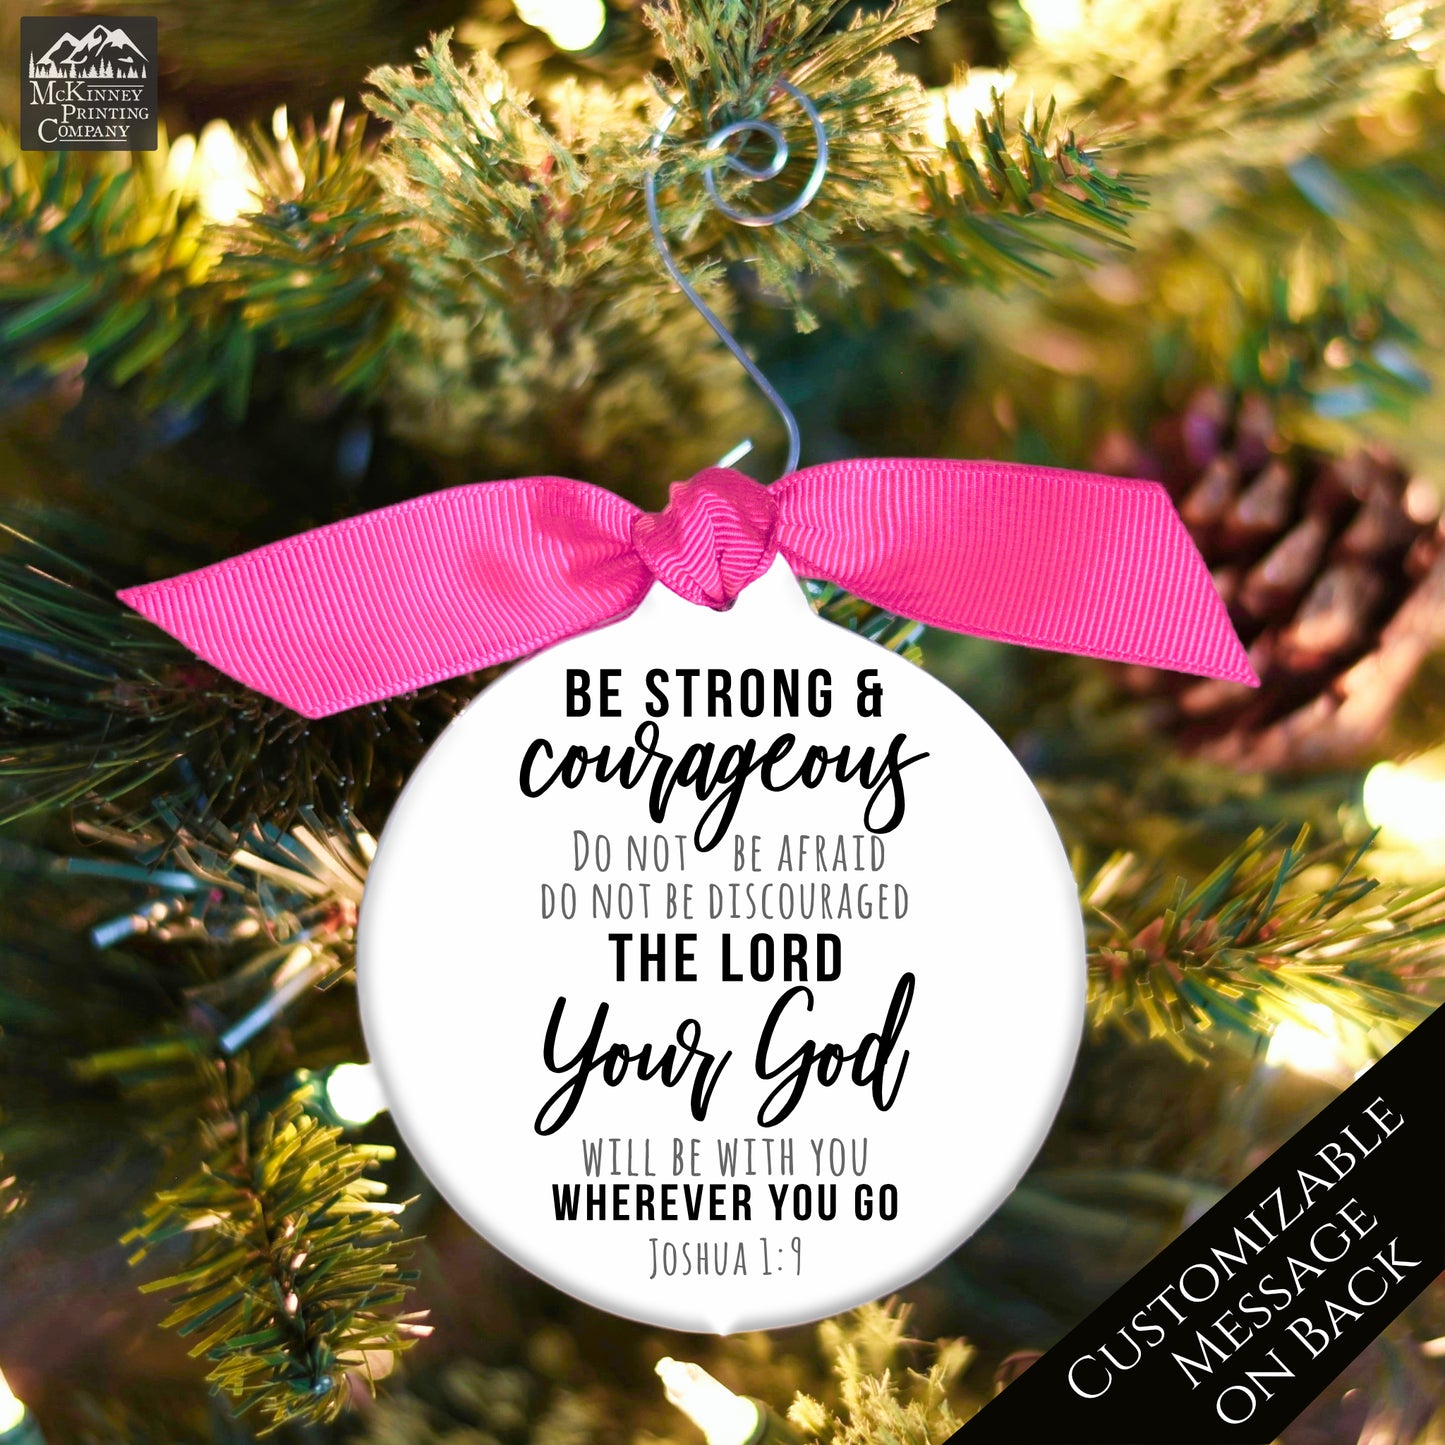 Joshua 1 9 - Christmas Ornament, Be Strong and Courageous, Christian Gift